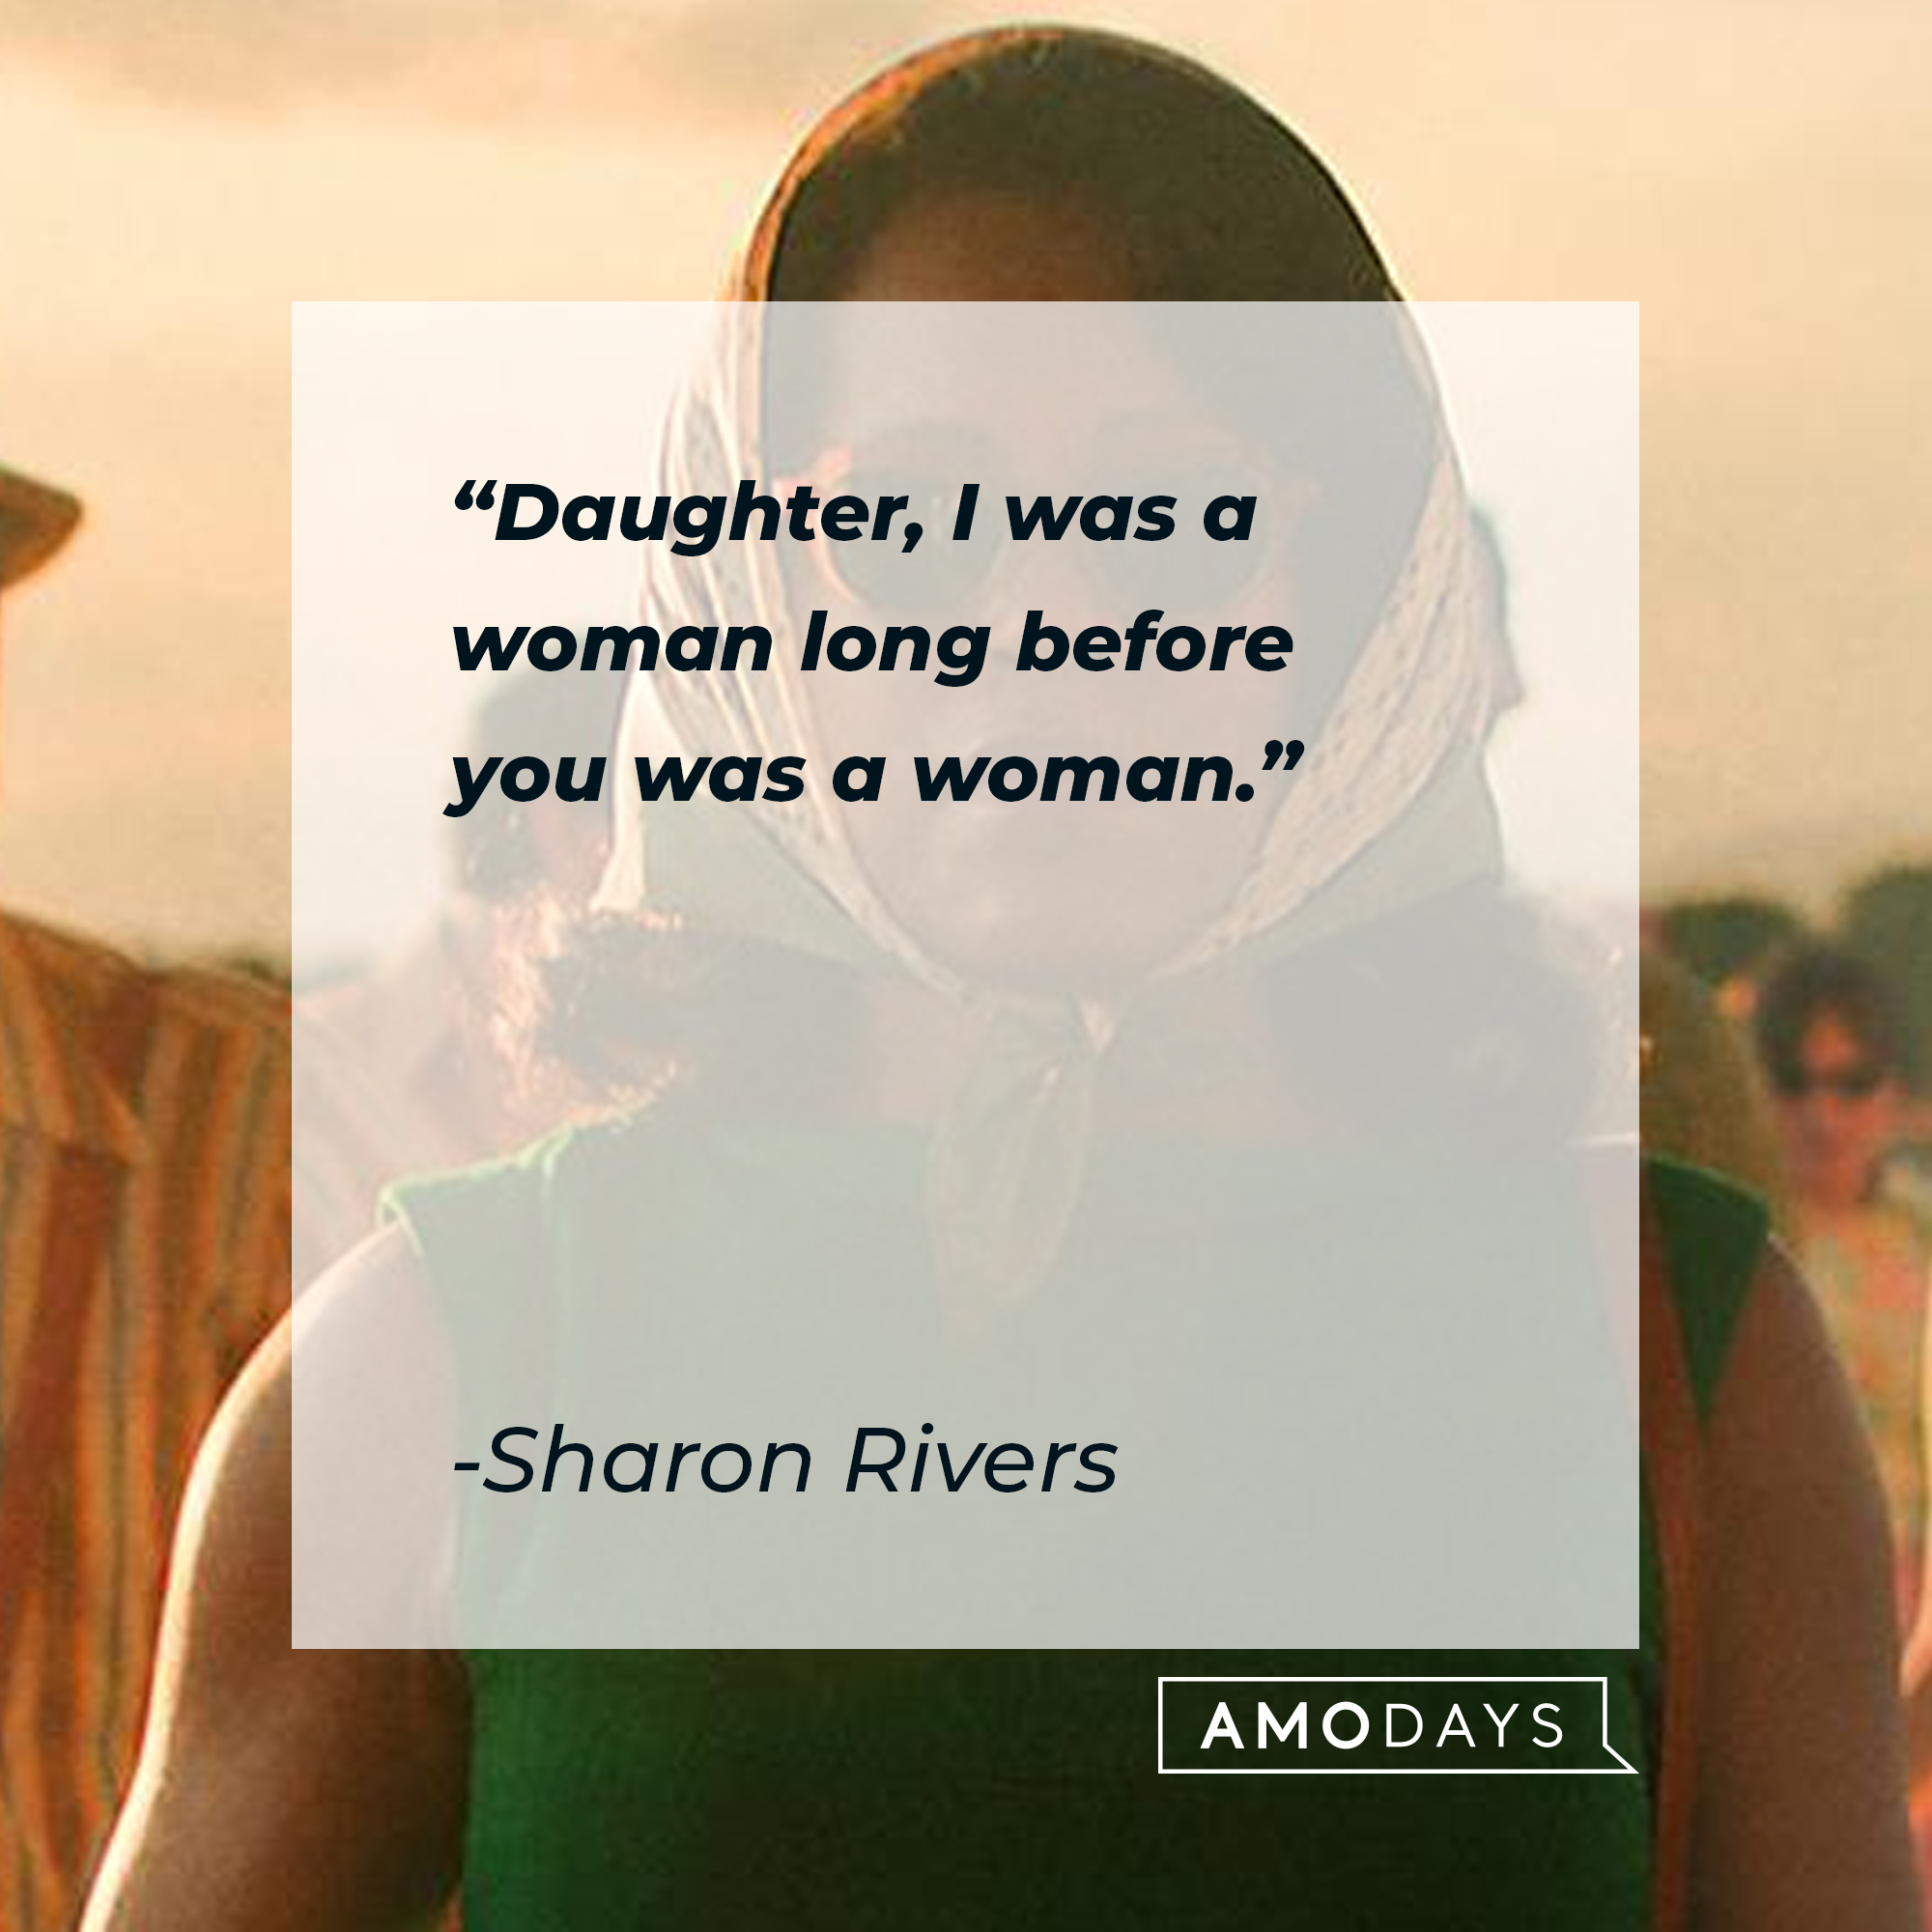 Tish Rivers' quote: "Daughter, I was a woman long before you was a woman." | Source: facebook.com/BealeStreet